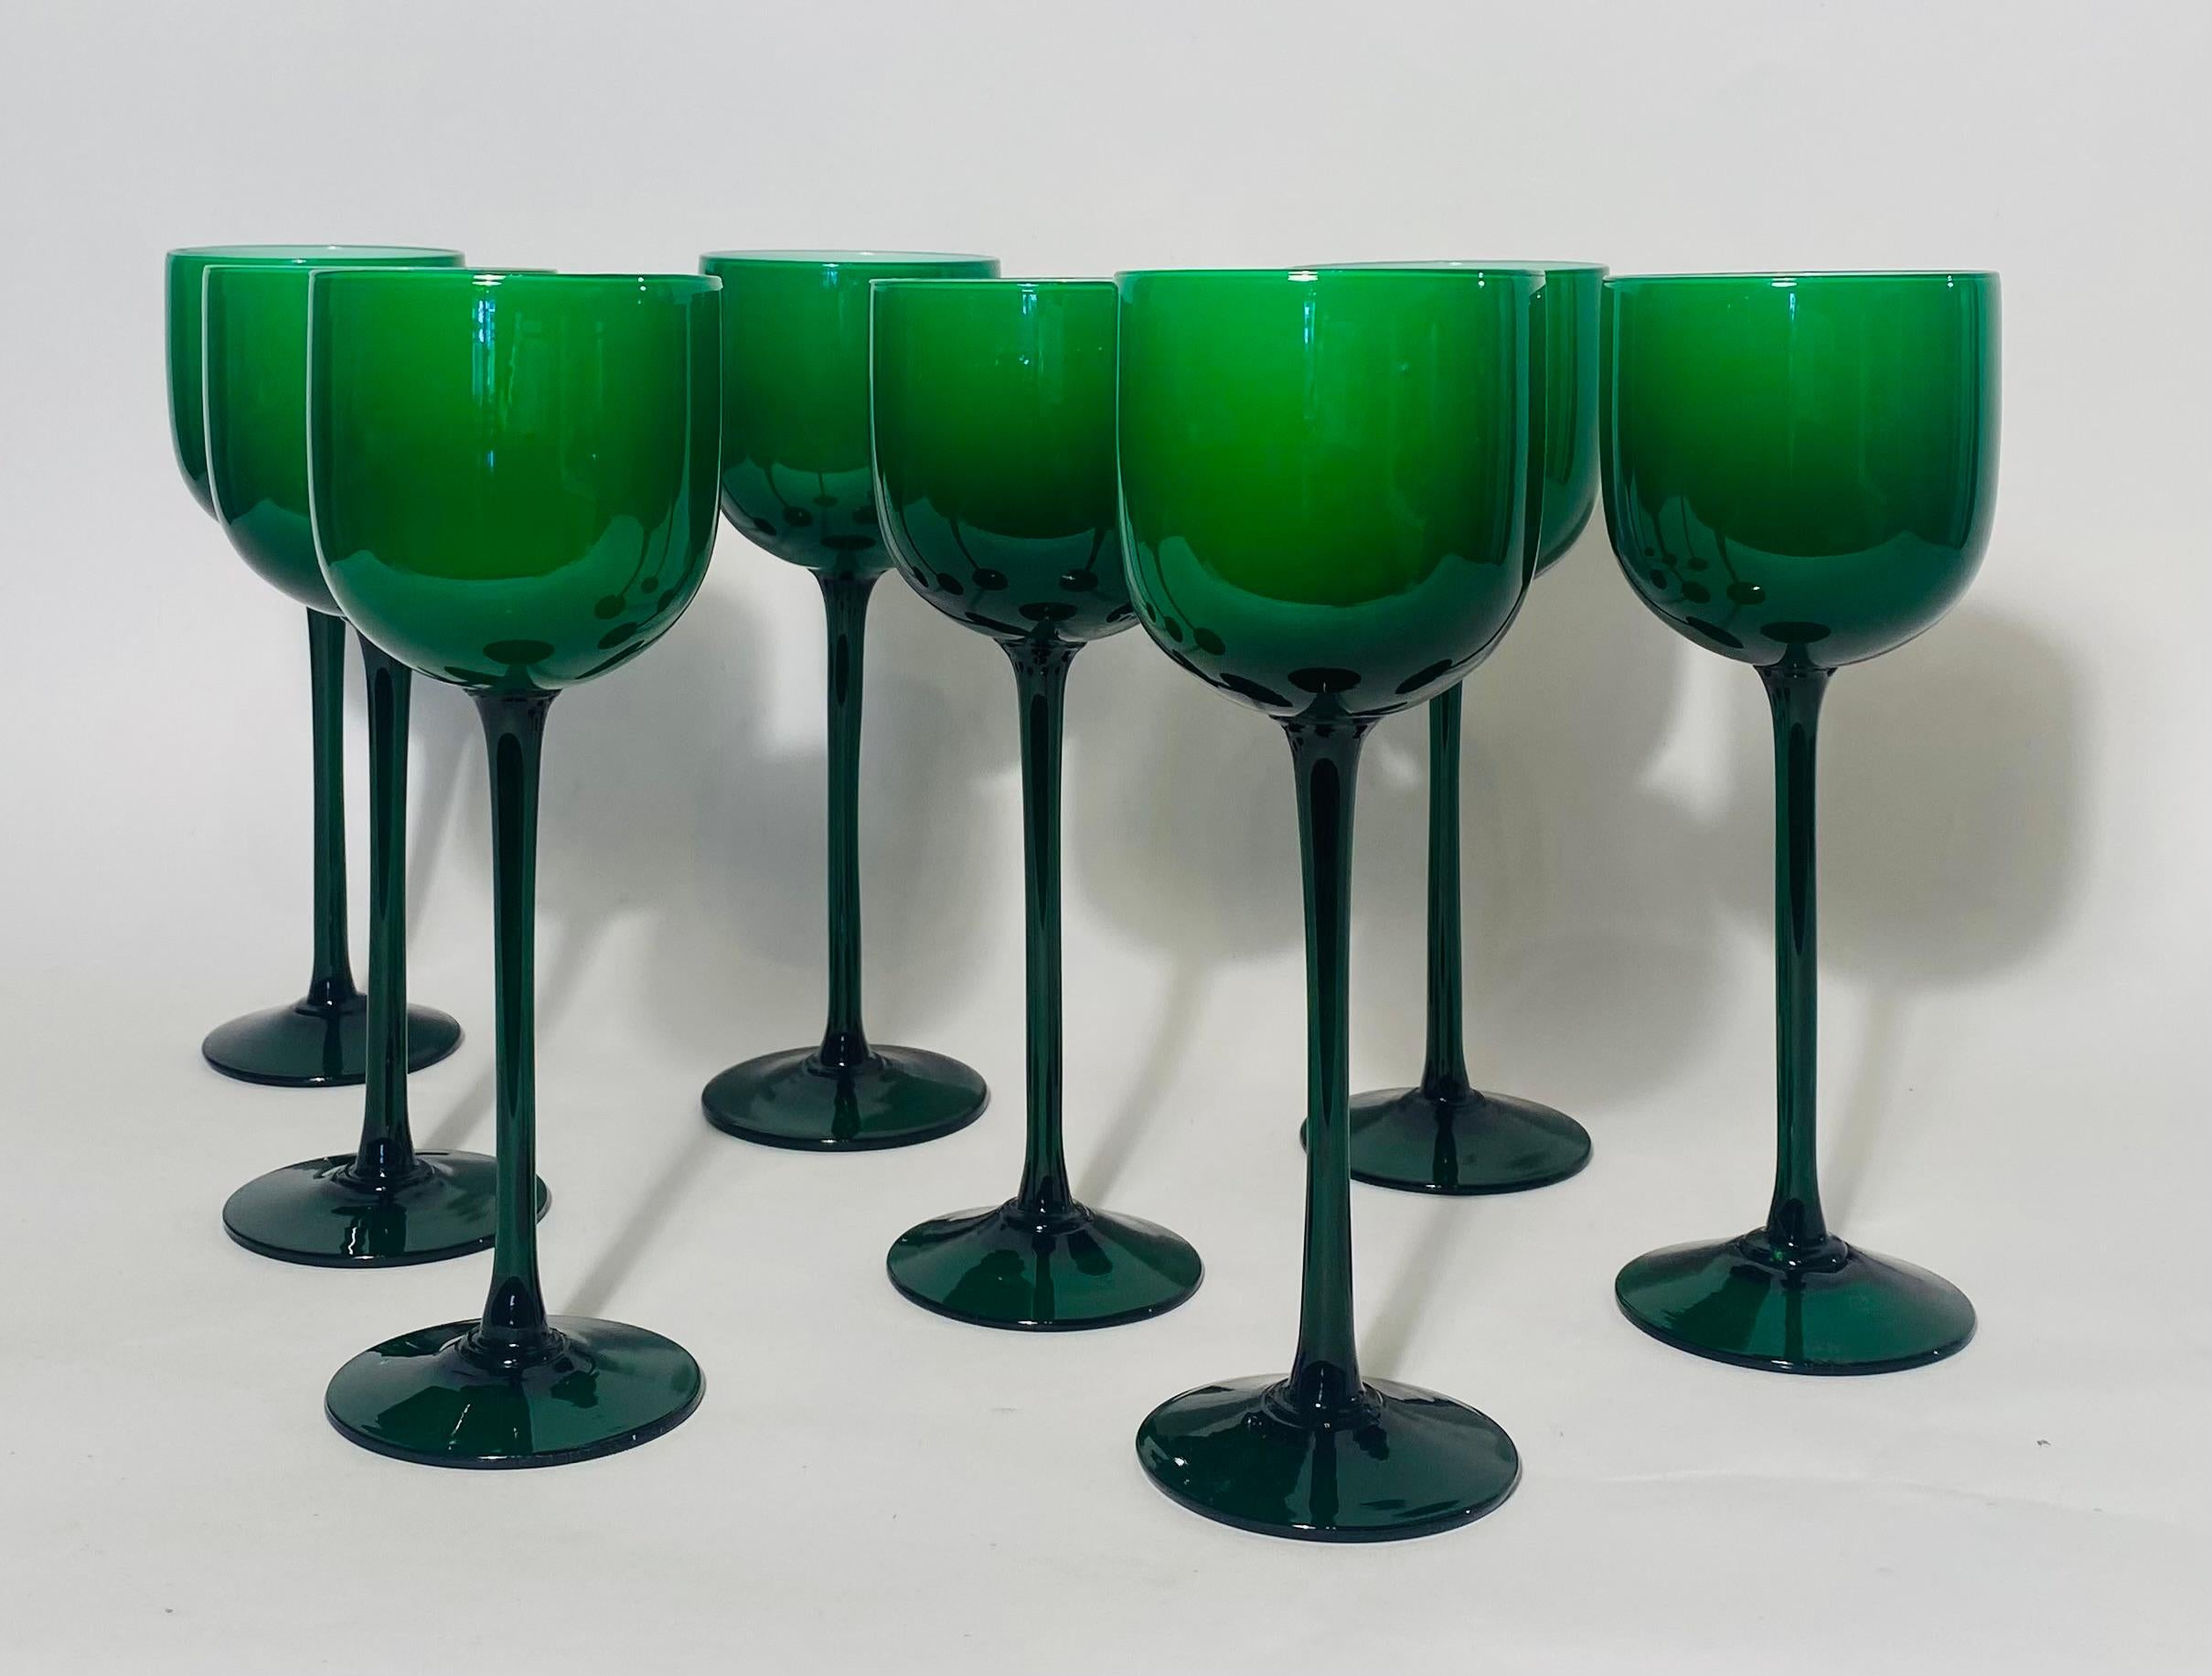 Hand-Crafted 8 Tall Carlo Moretti Vibrant Green & White Cased Goblets. Vintage Circa 1960's